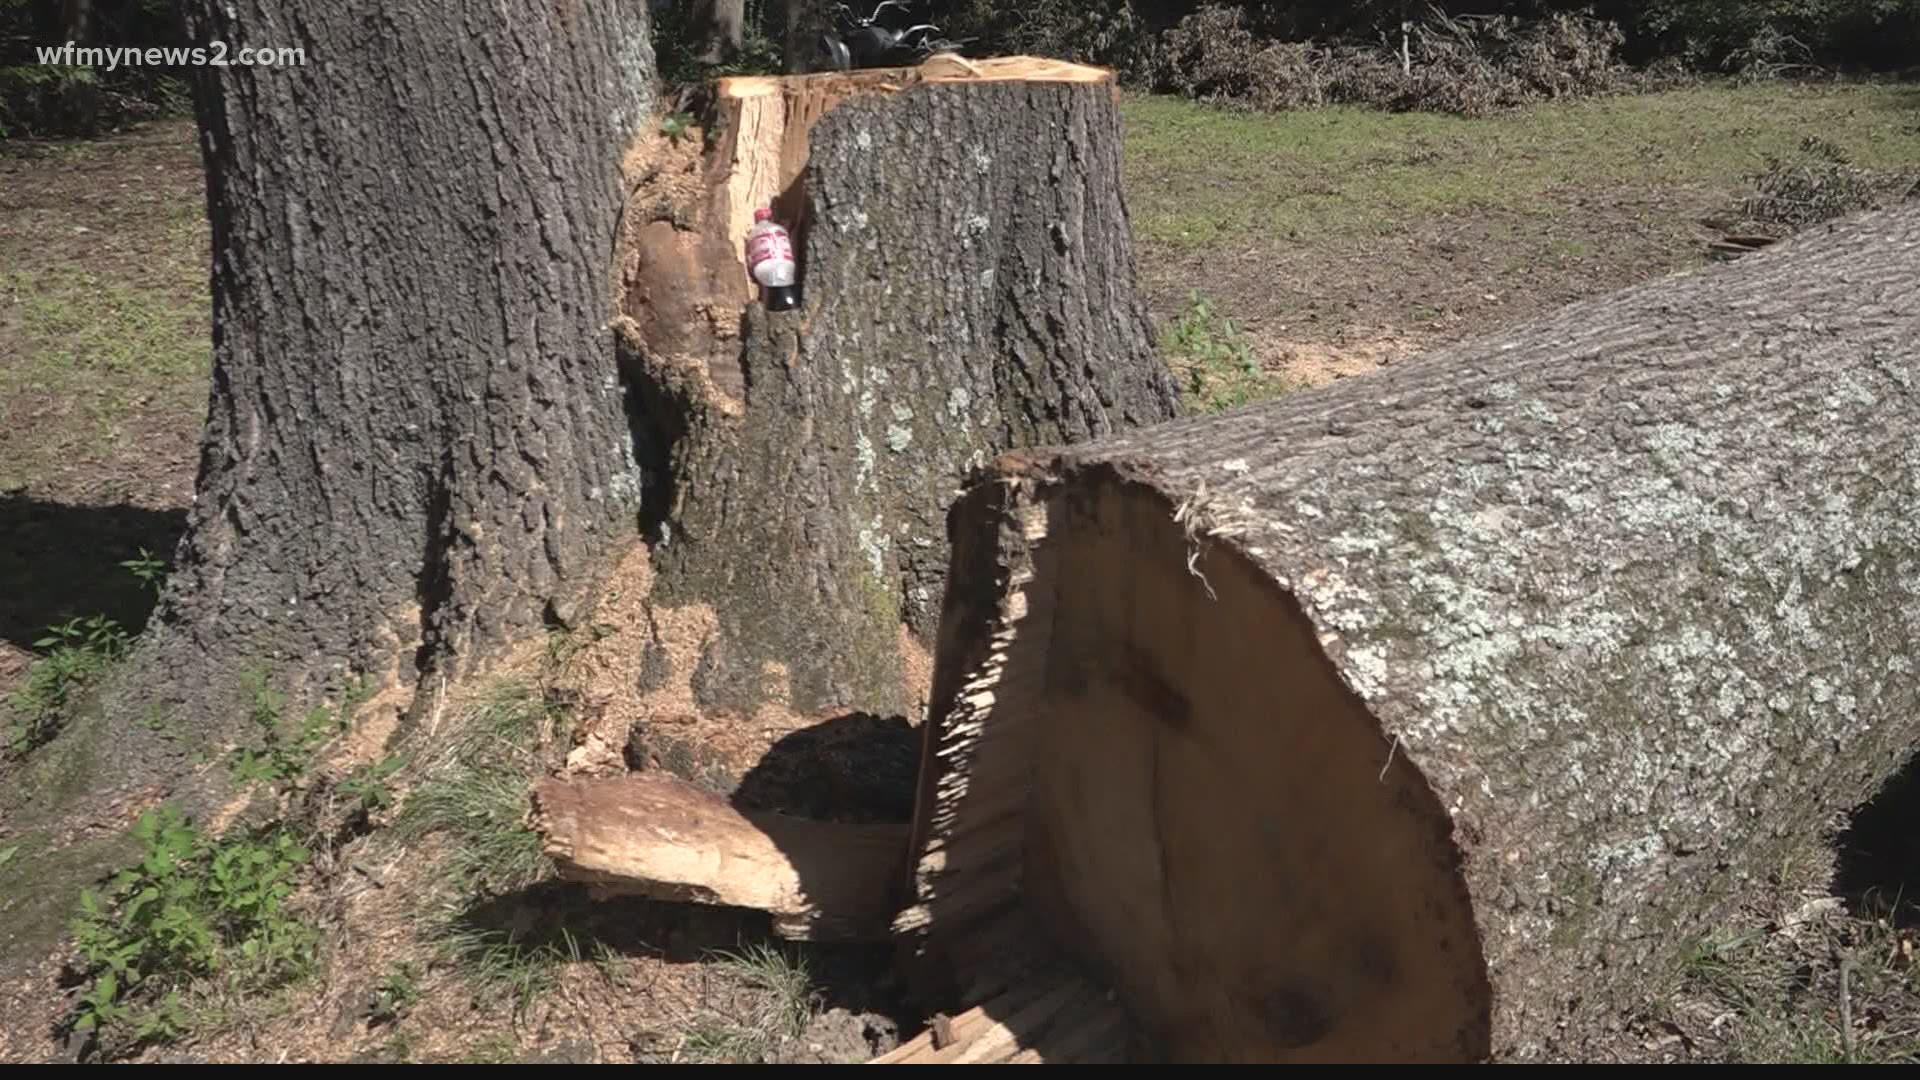 The landlord of the Echol's family's rental home wanted a tree cut down. But that tree fell on the home.